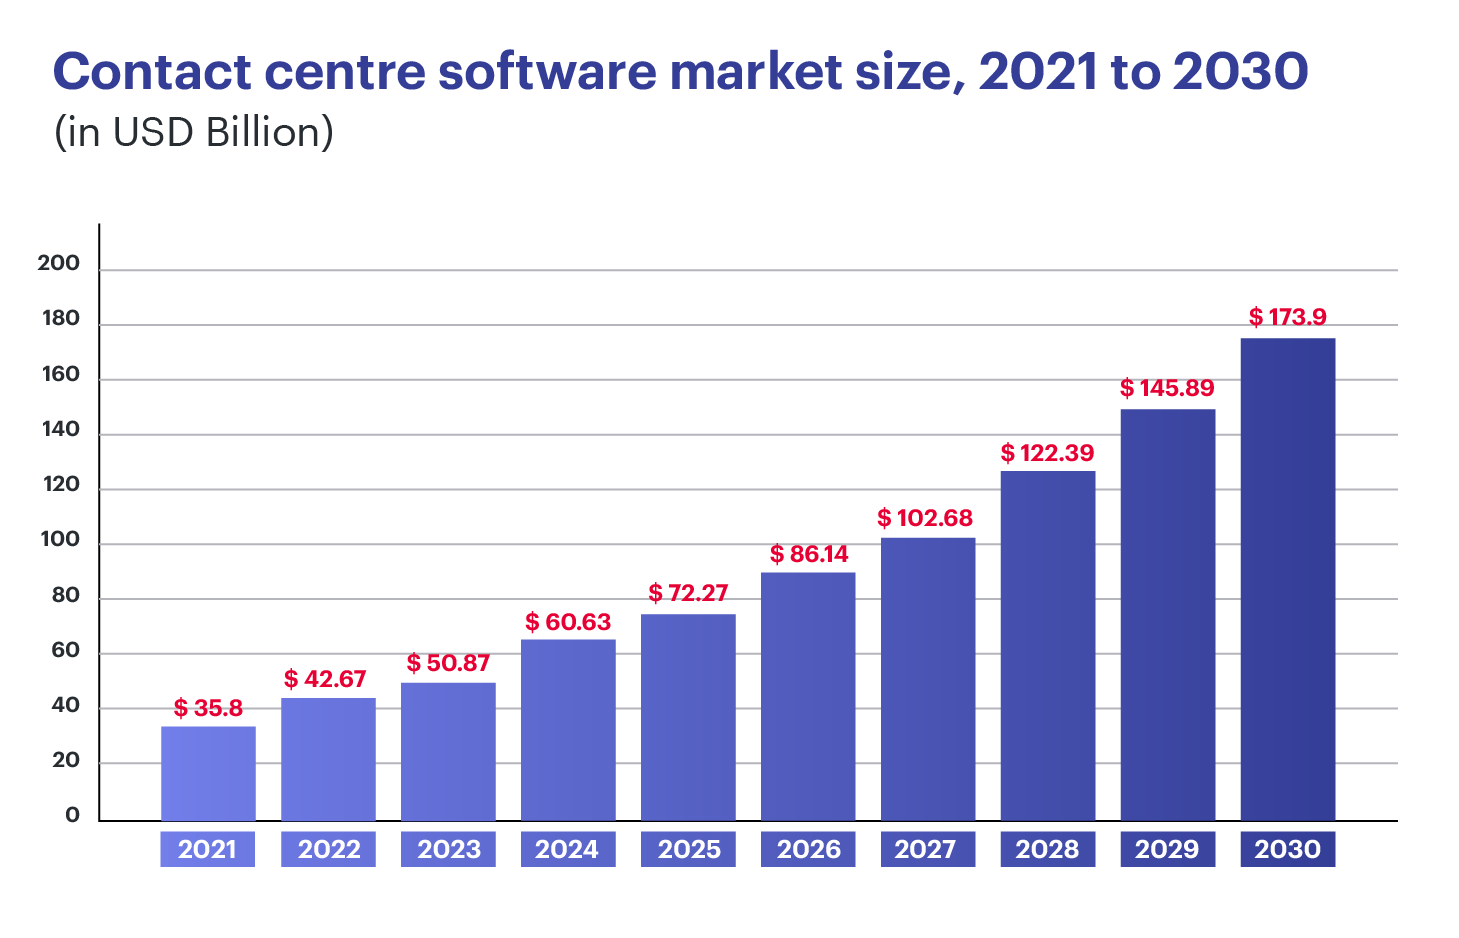 Contact center software market size